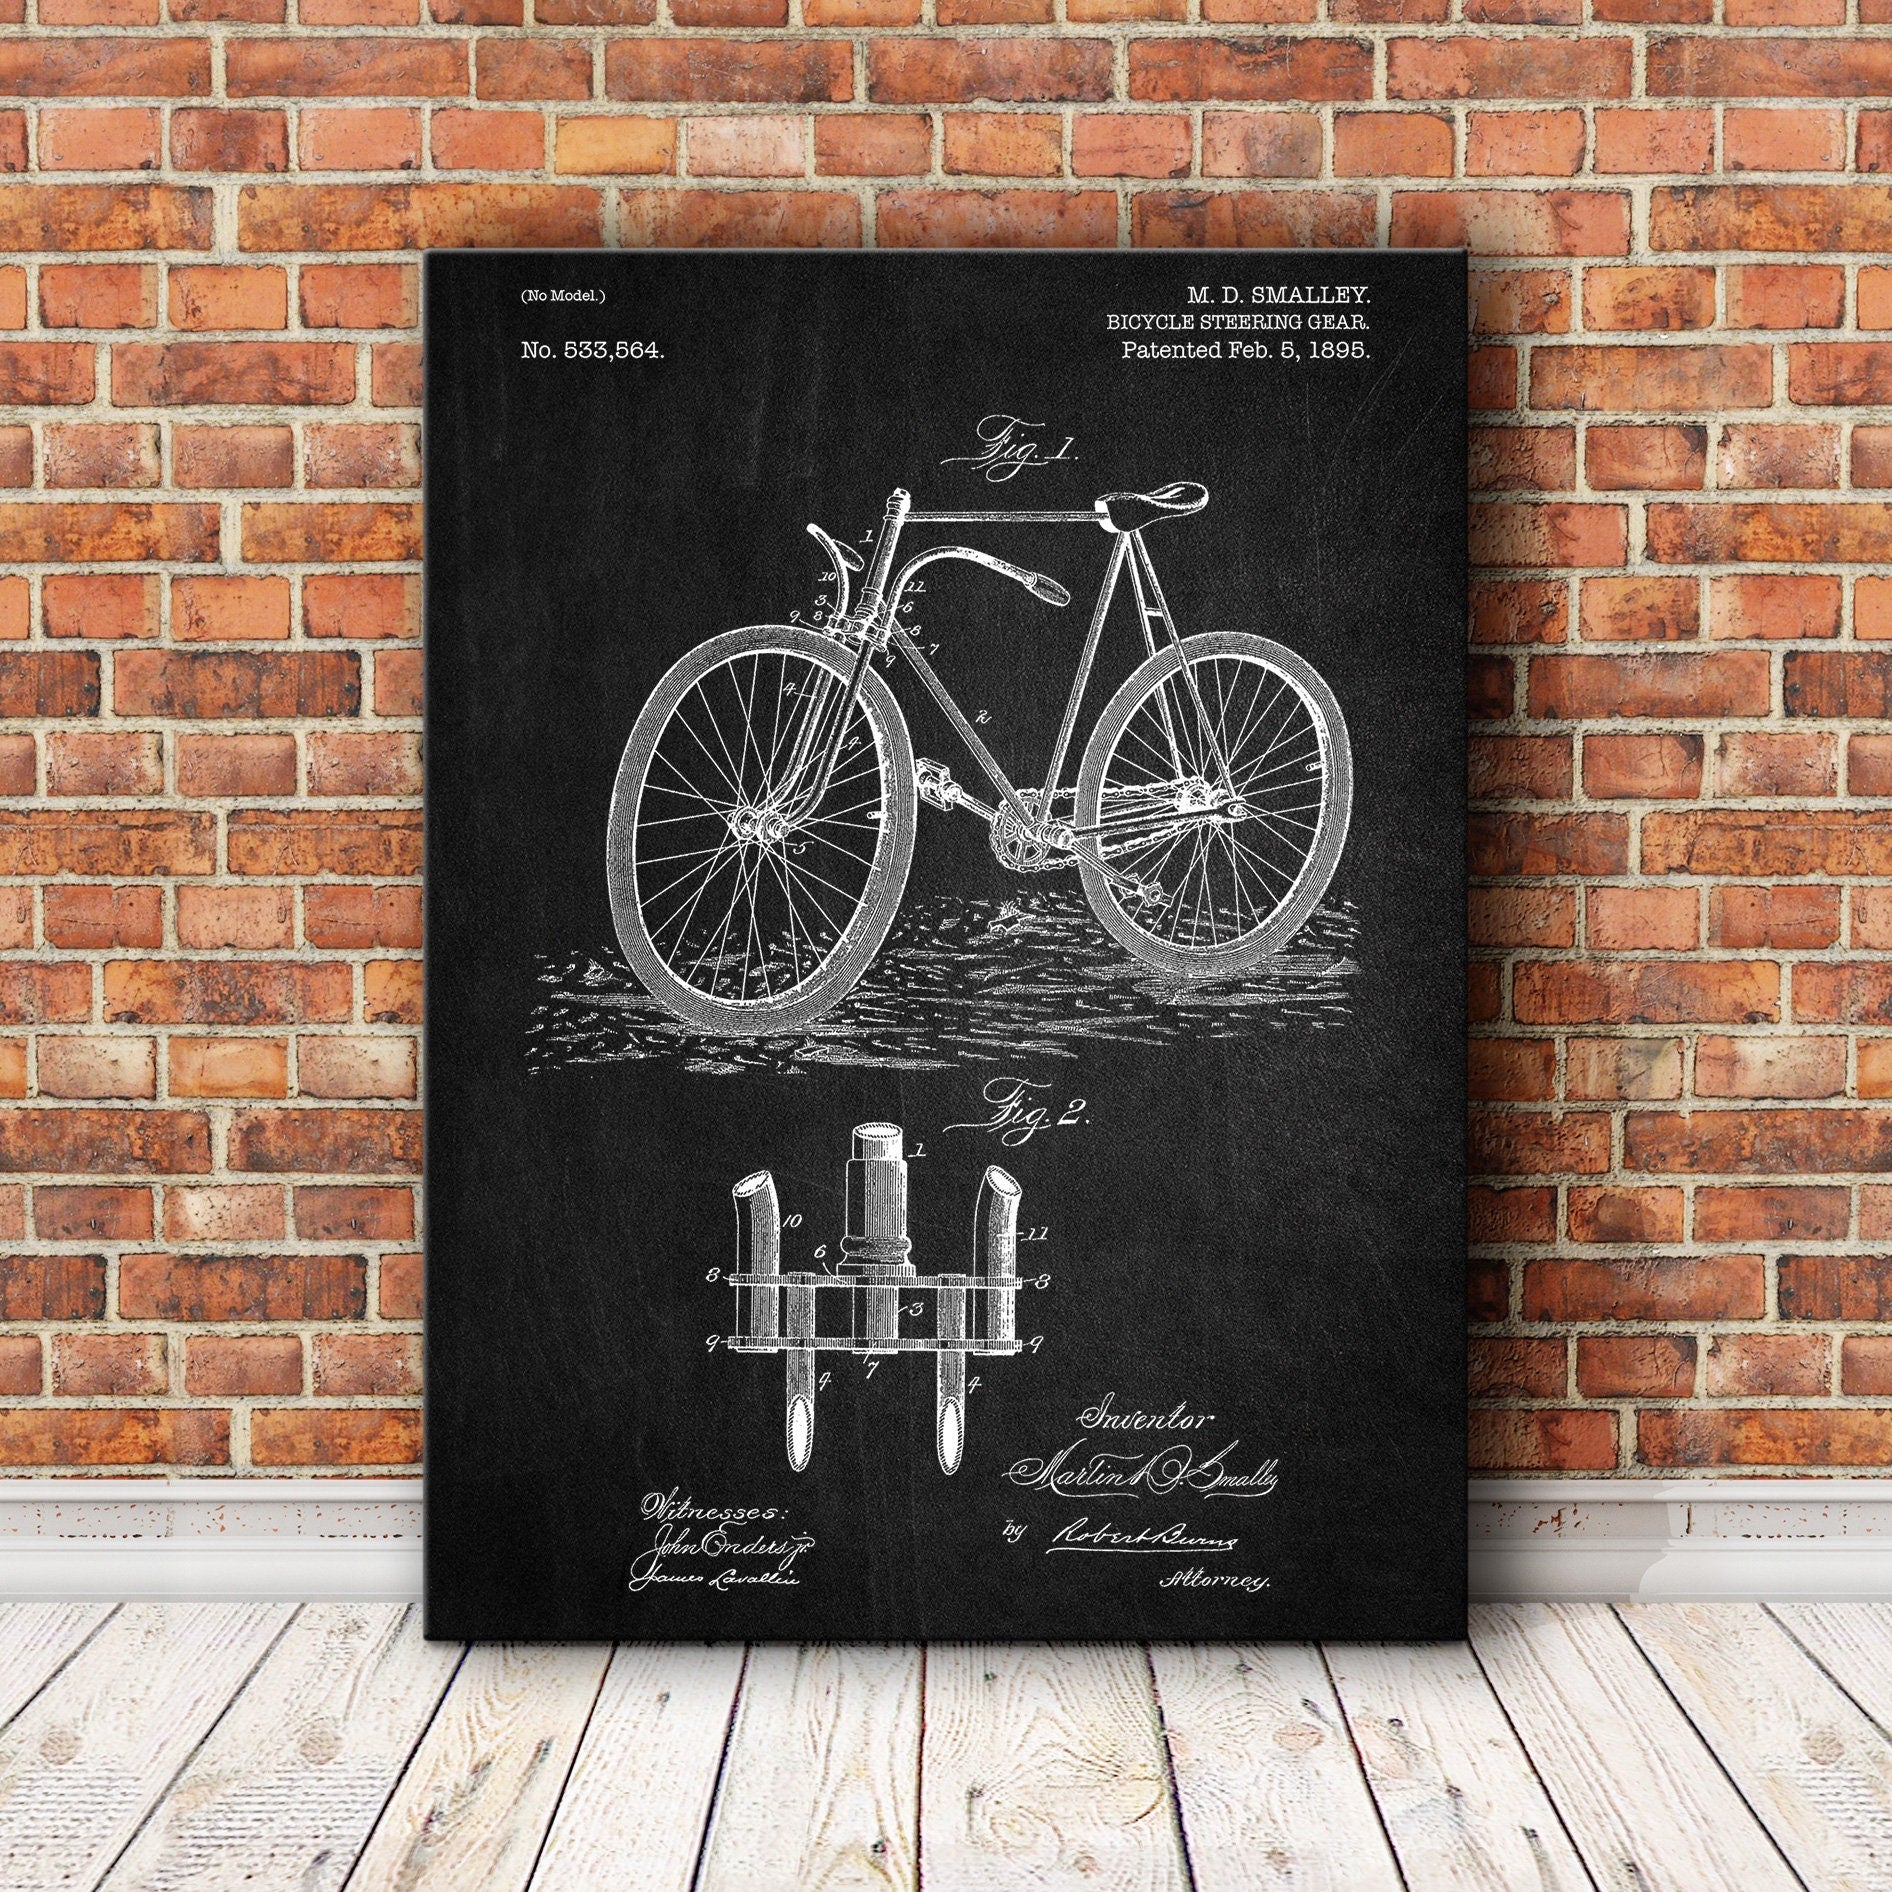 Sports Patent print, Bicycle Steering Gear for Sports Patent print, Patent print, Patent print design, Vintage patent print, Sports Art